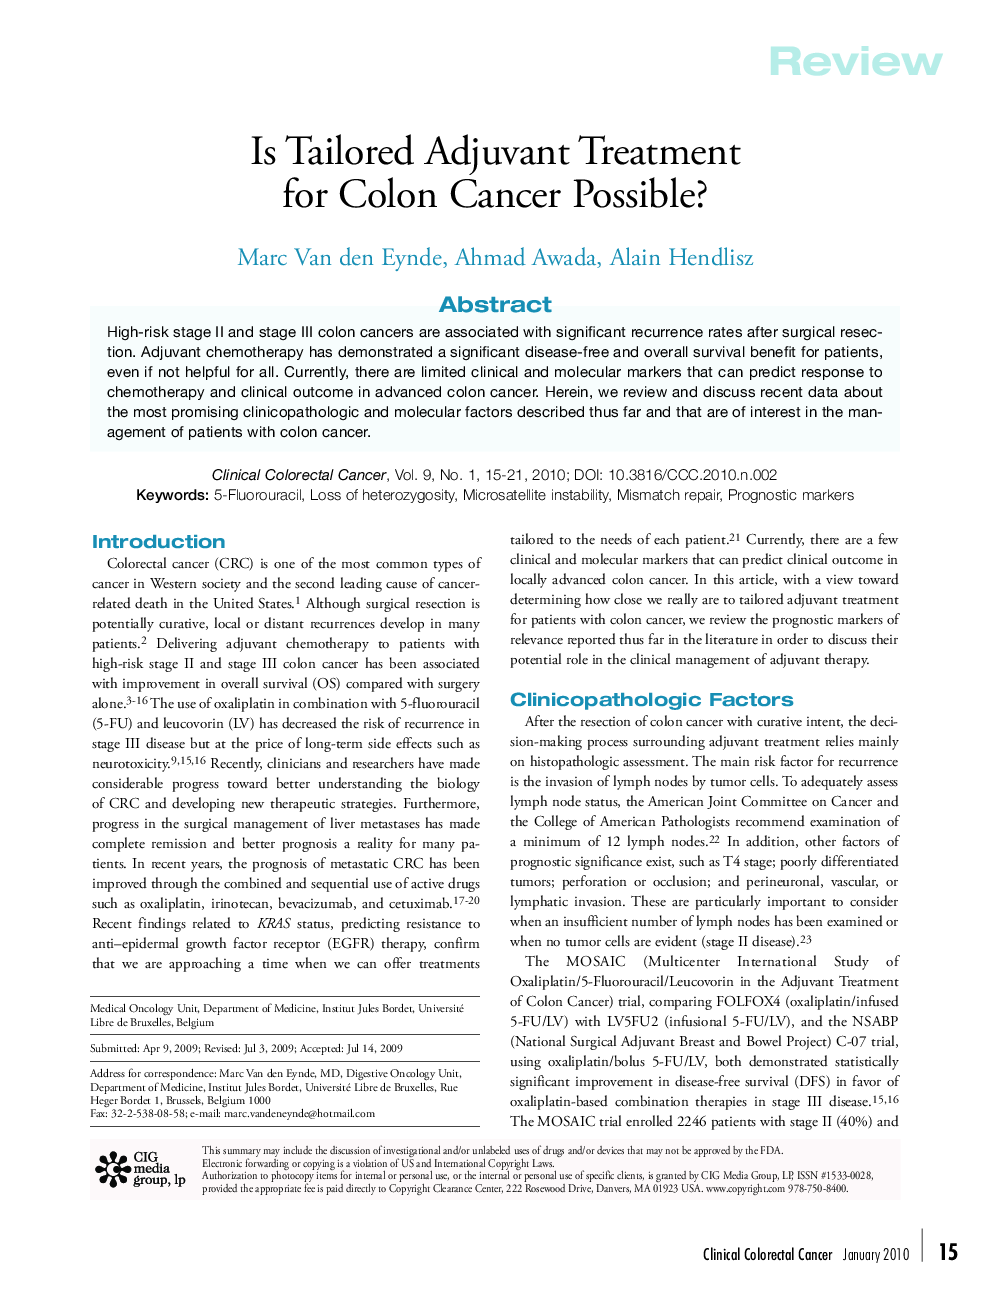 Is Tailored Adjuvant Treatment for Colon Cancer Possible? 